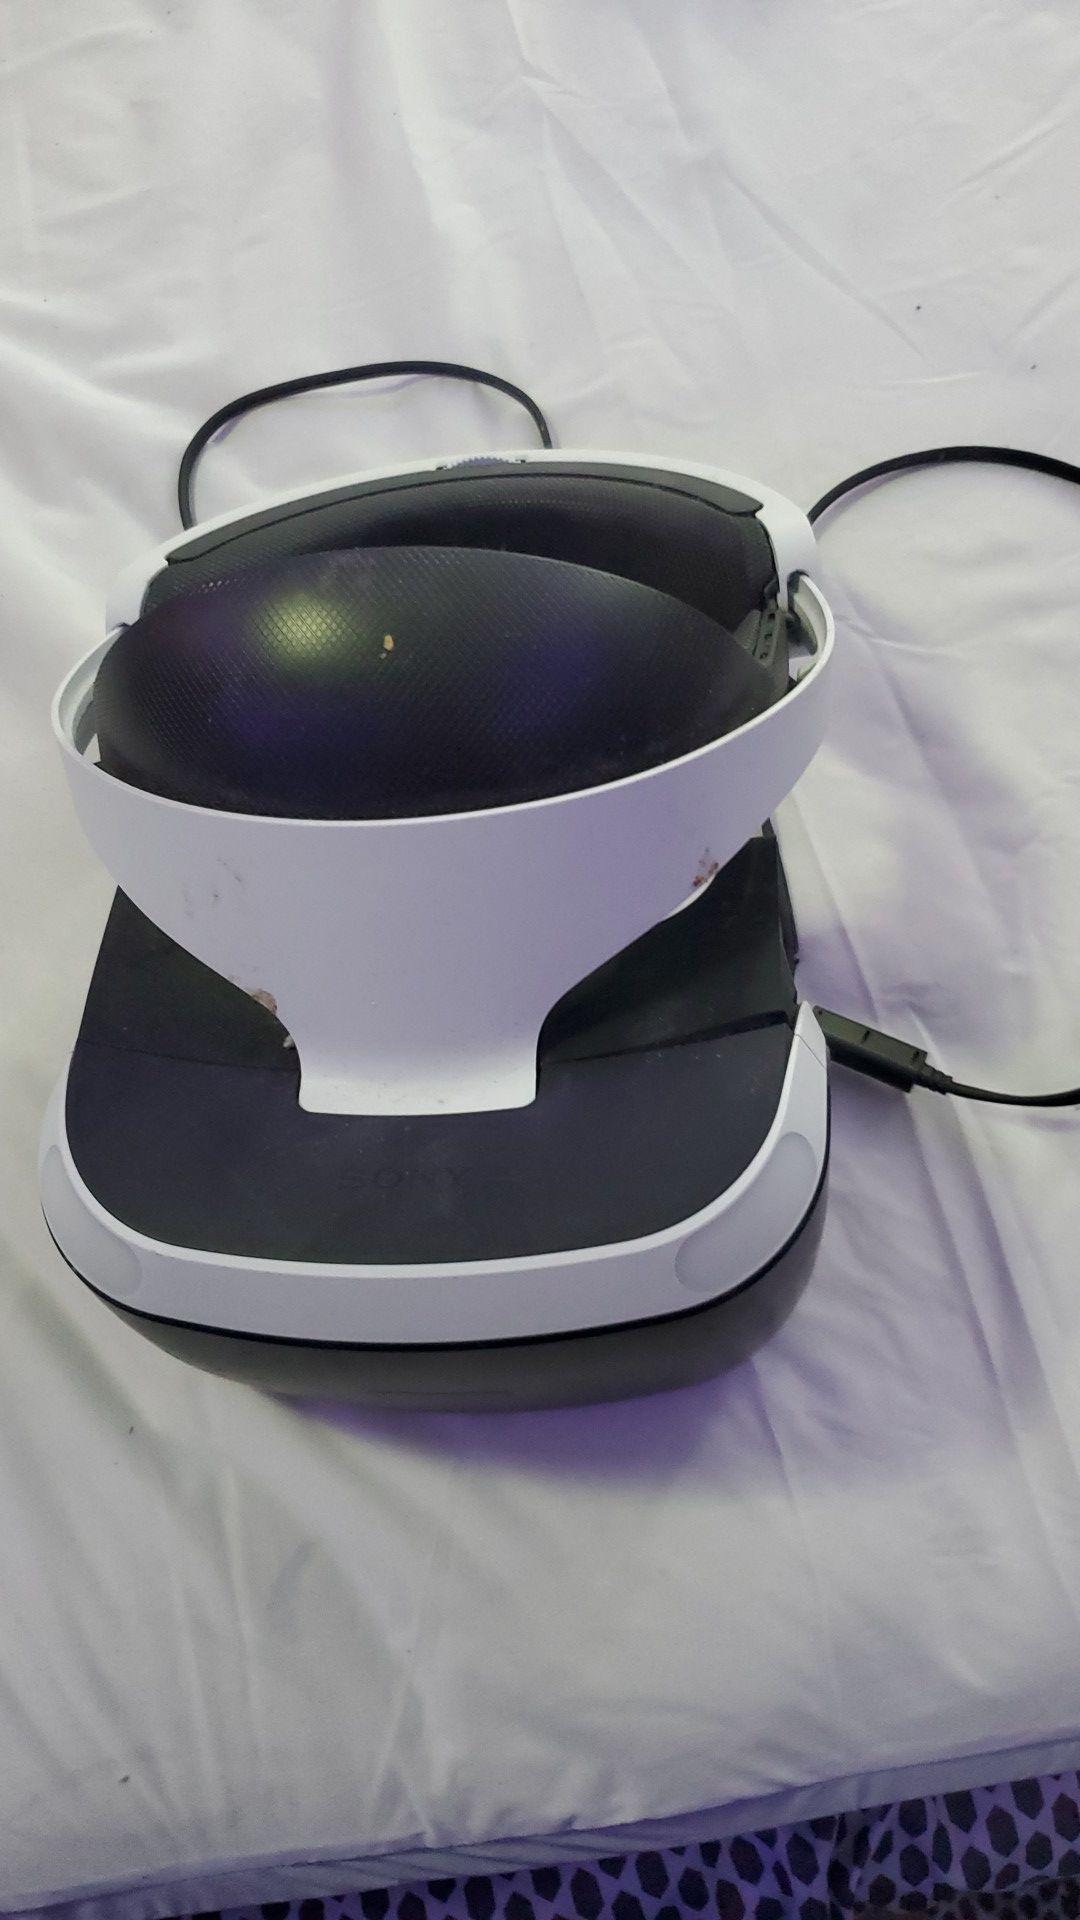 Ps4 VR headset